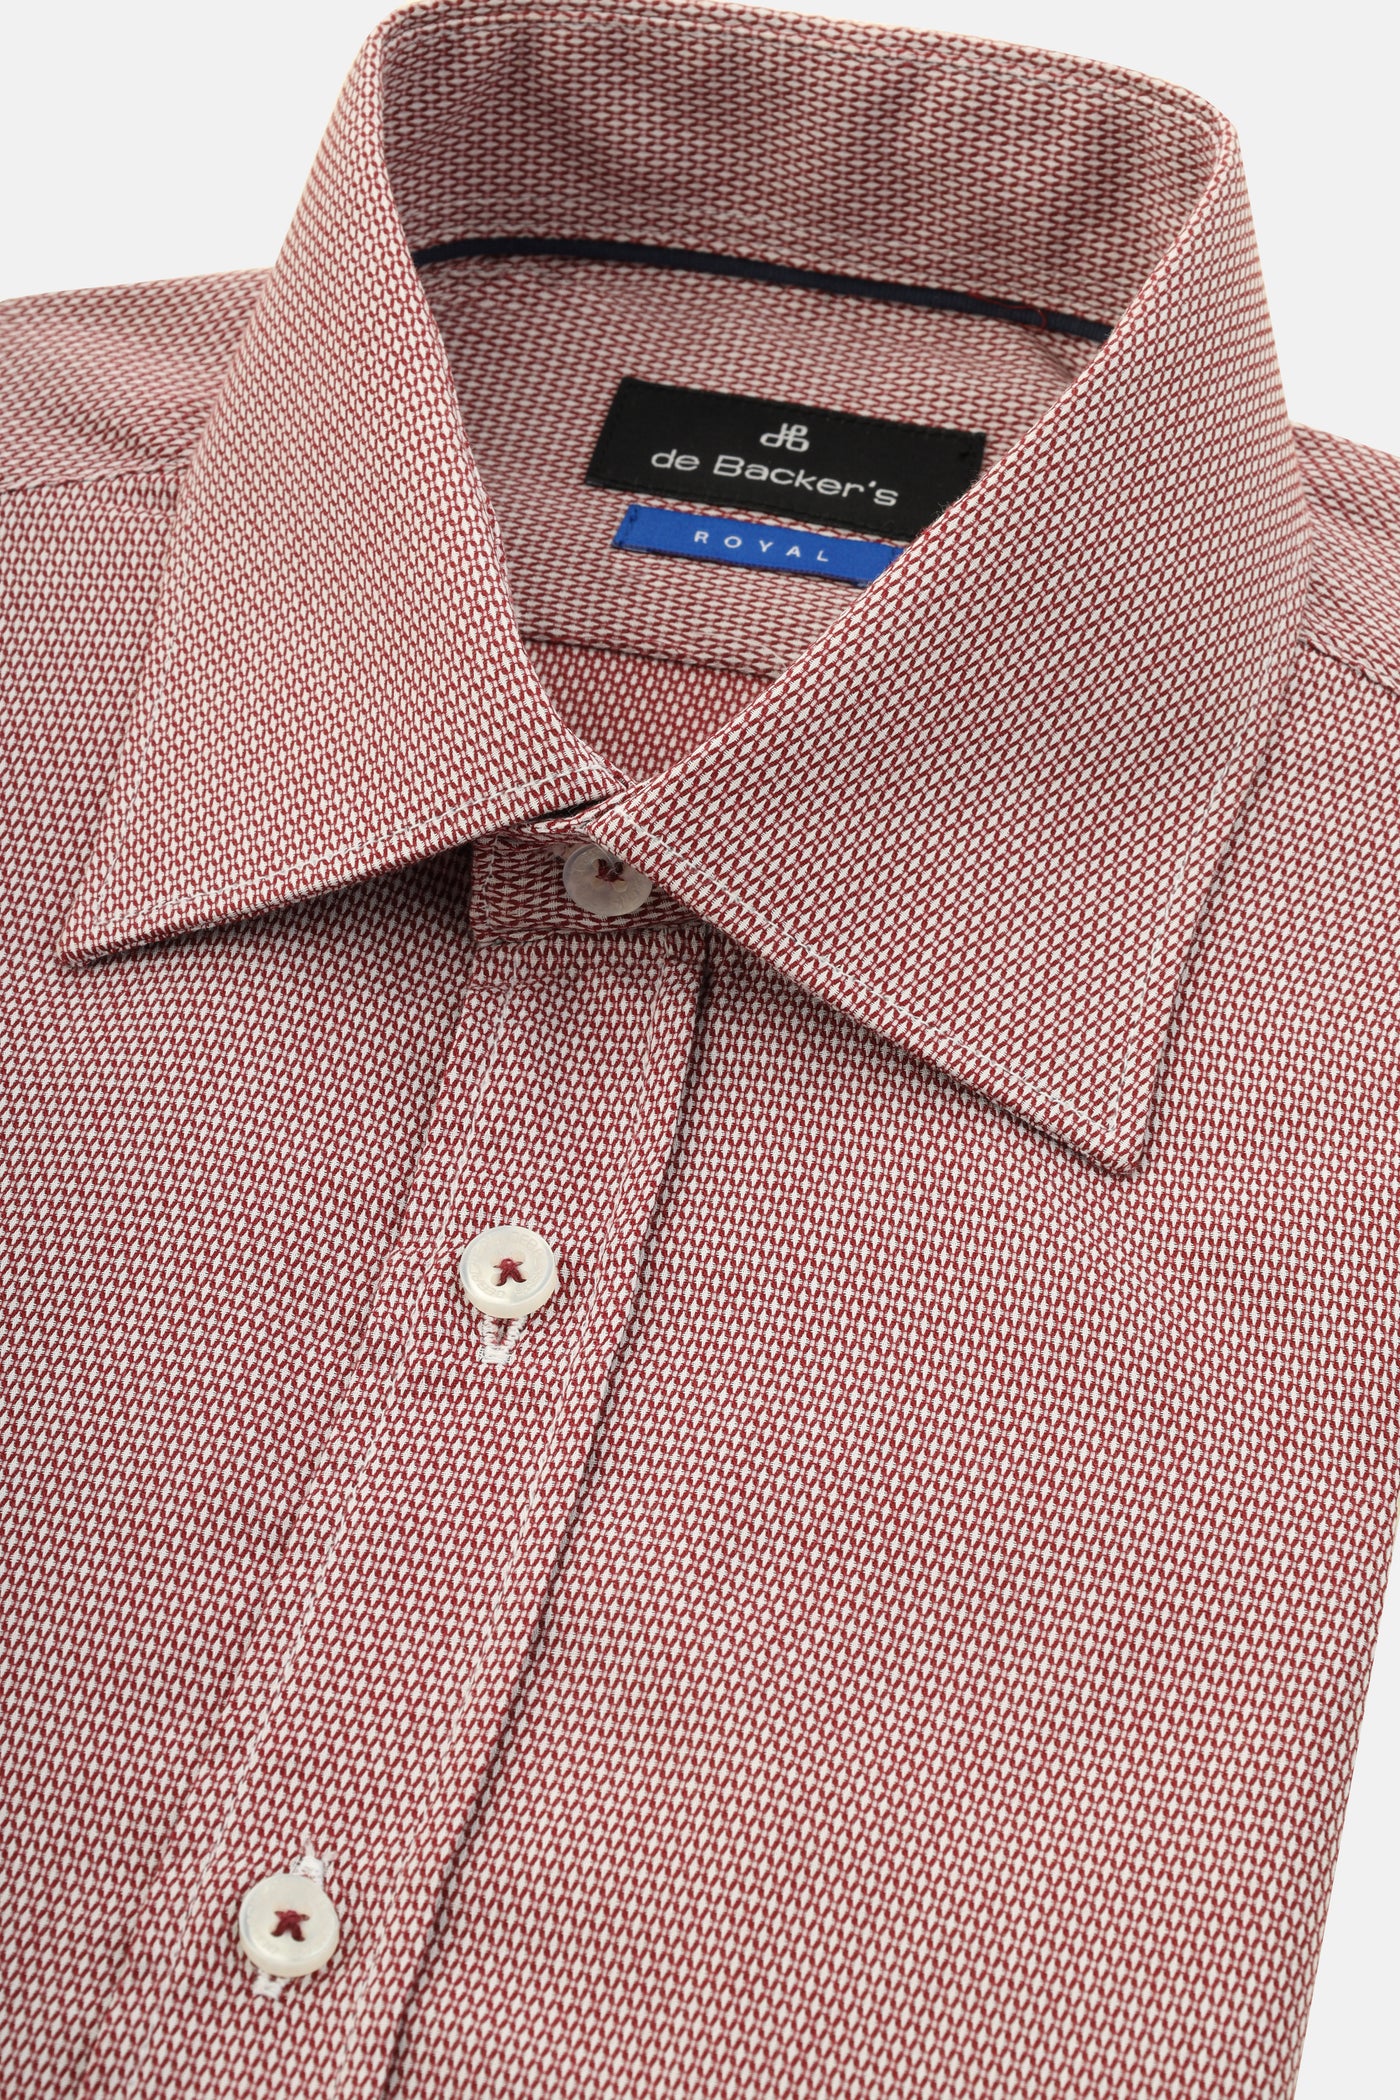 patterned Dark Red  & White Cotton Simi Classic Shirt